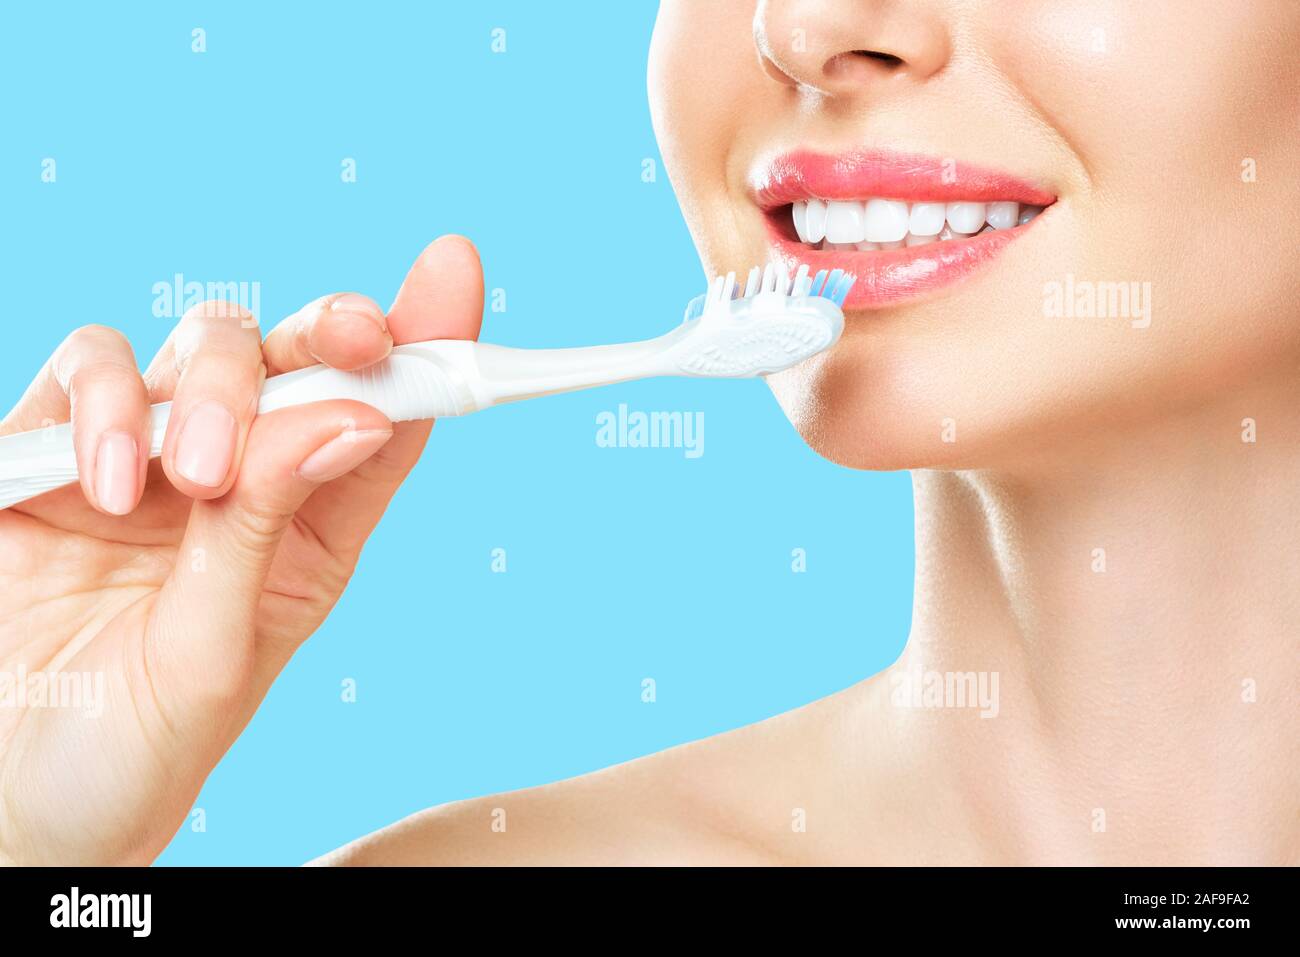 White Teeth with toothbrush. Dental health background Stock Photo